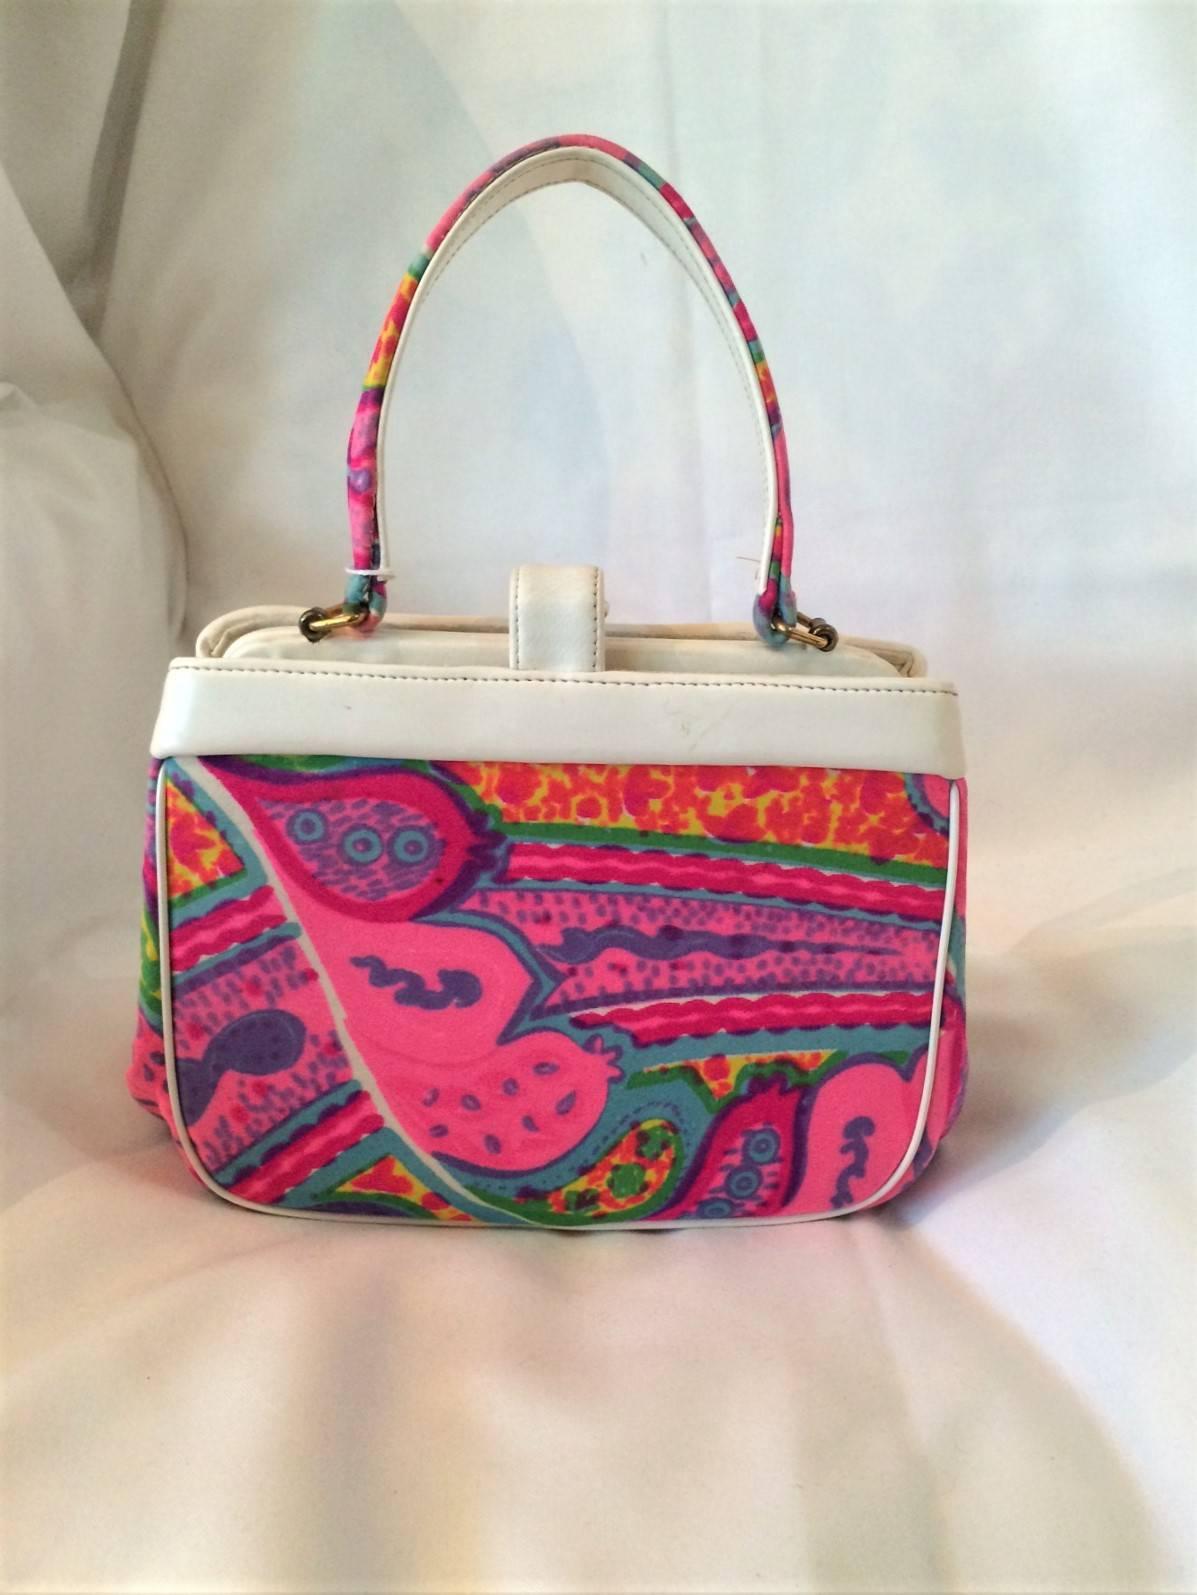 Vintage 1950-1960 David's Fifth Avenue box purse pucci colors. Leather top perimeter with leather a leather strap lock as well as a clasp lock interior. The colors are vibrant and the handbag clean. Some soiling on tag otherwise fine vintage